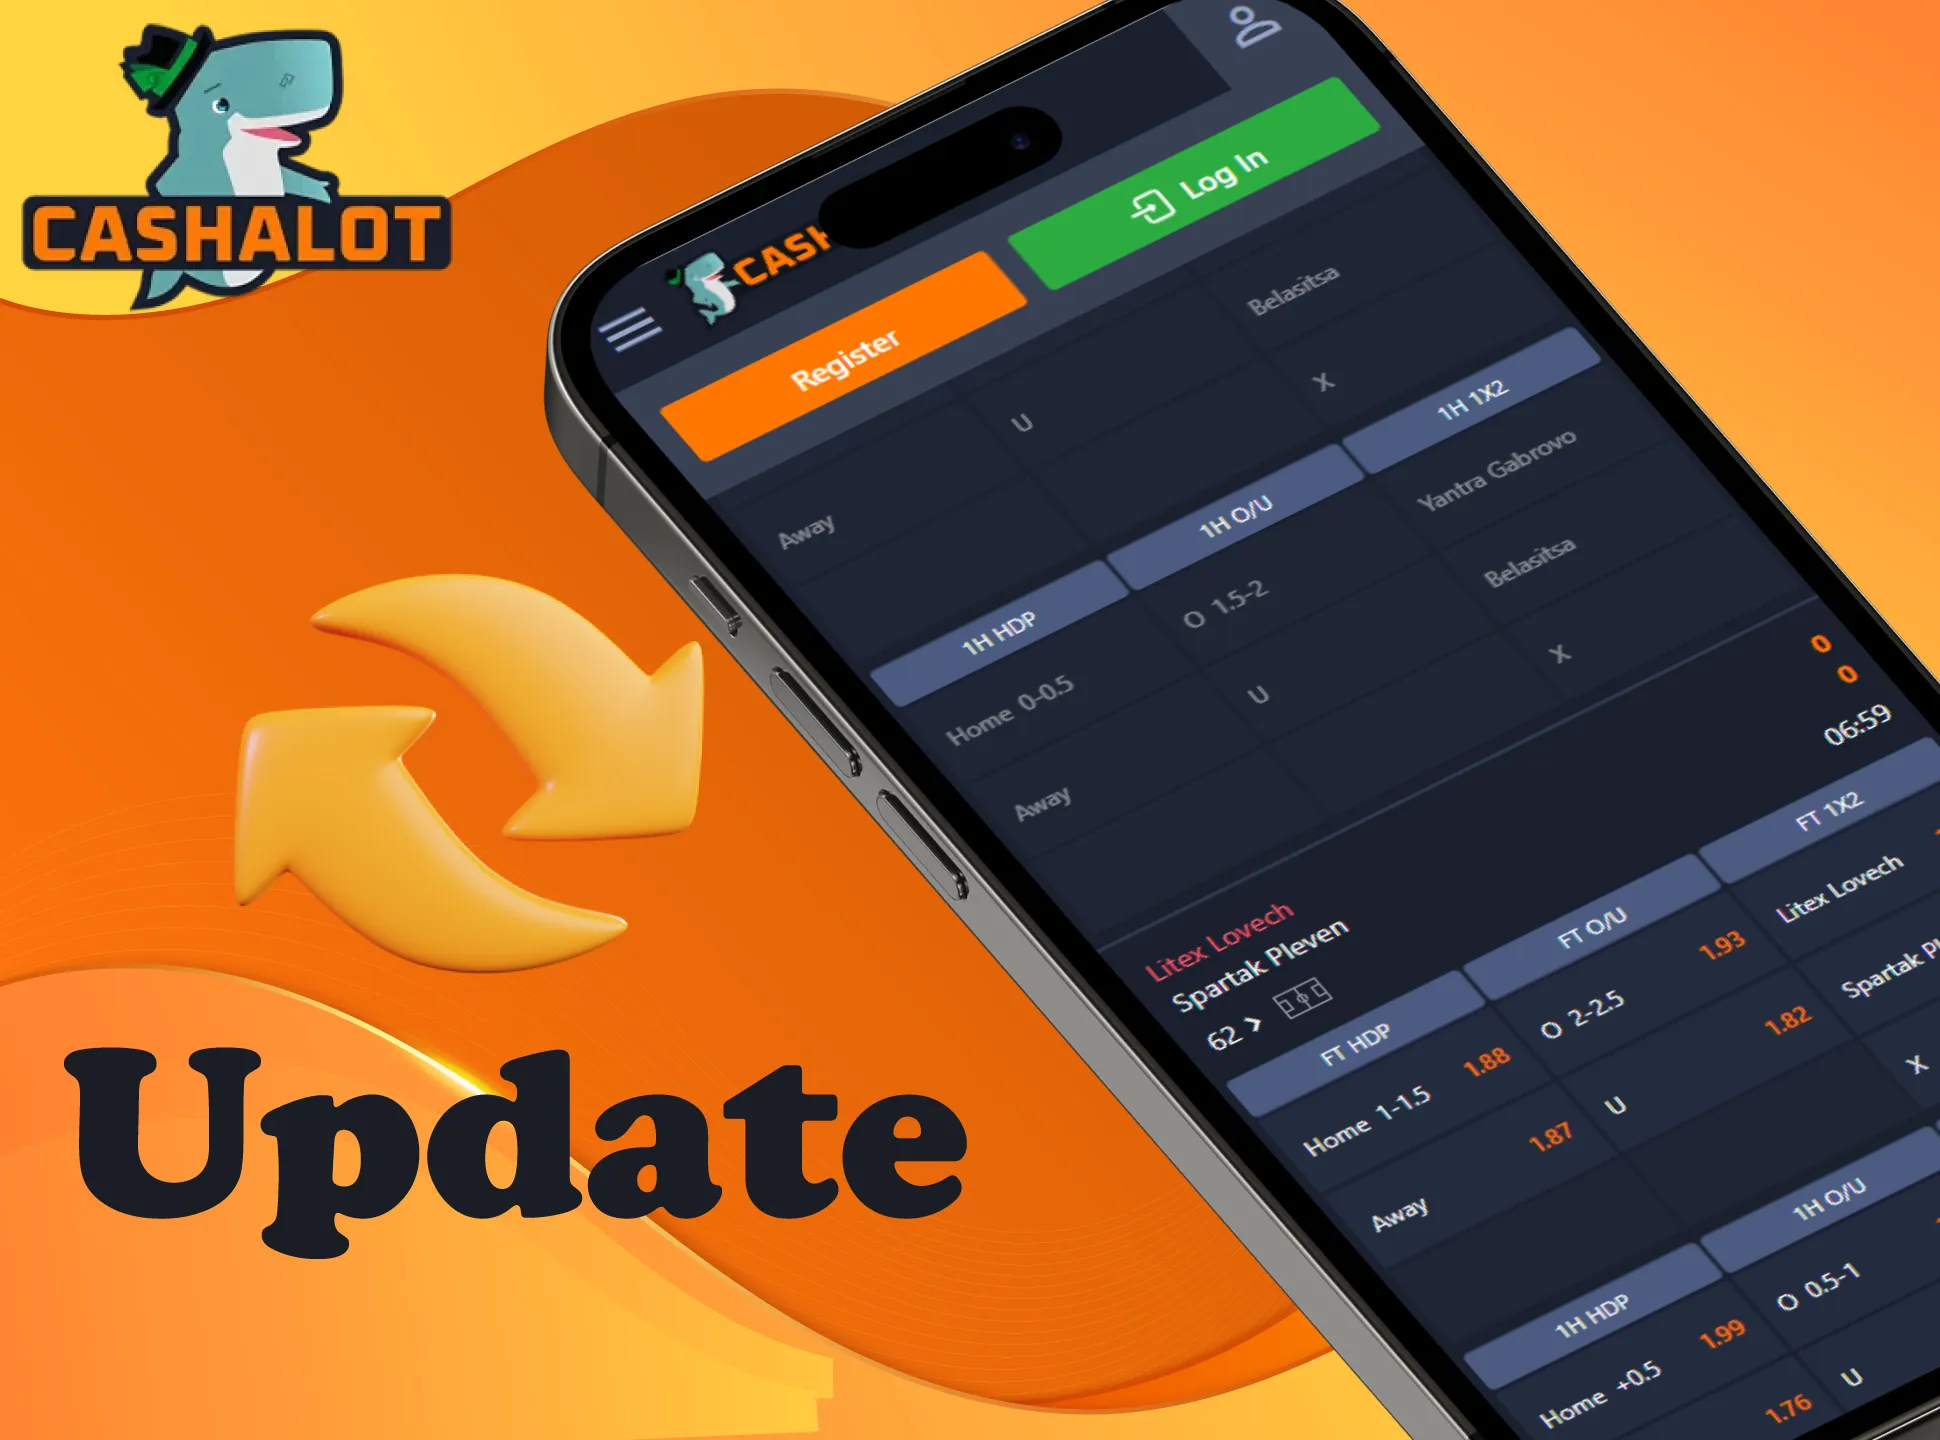 The Cashalot app is updated automatically after each start of the app.